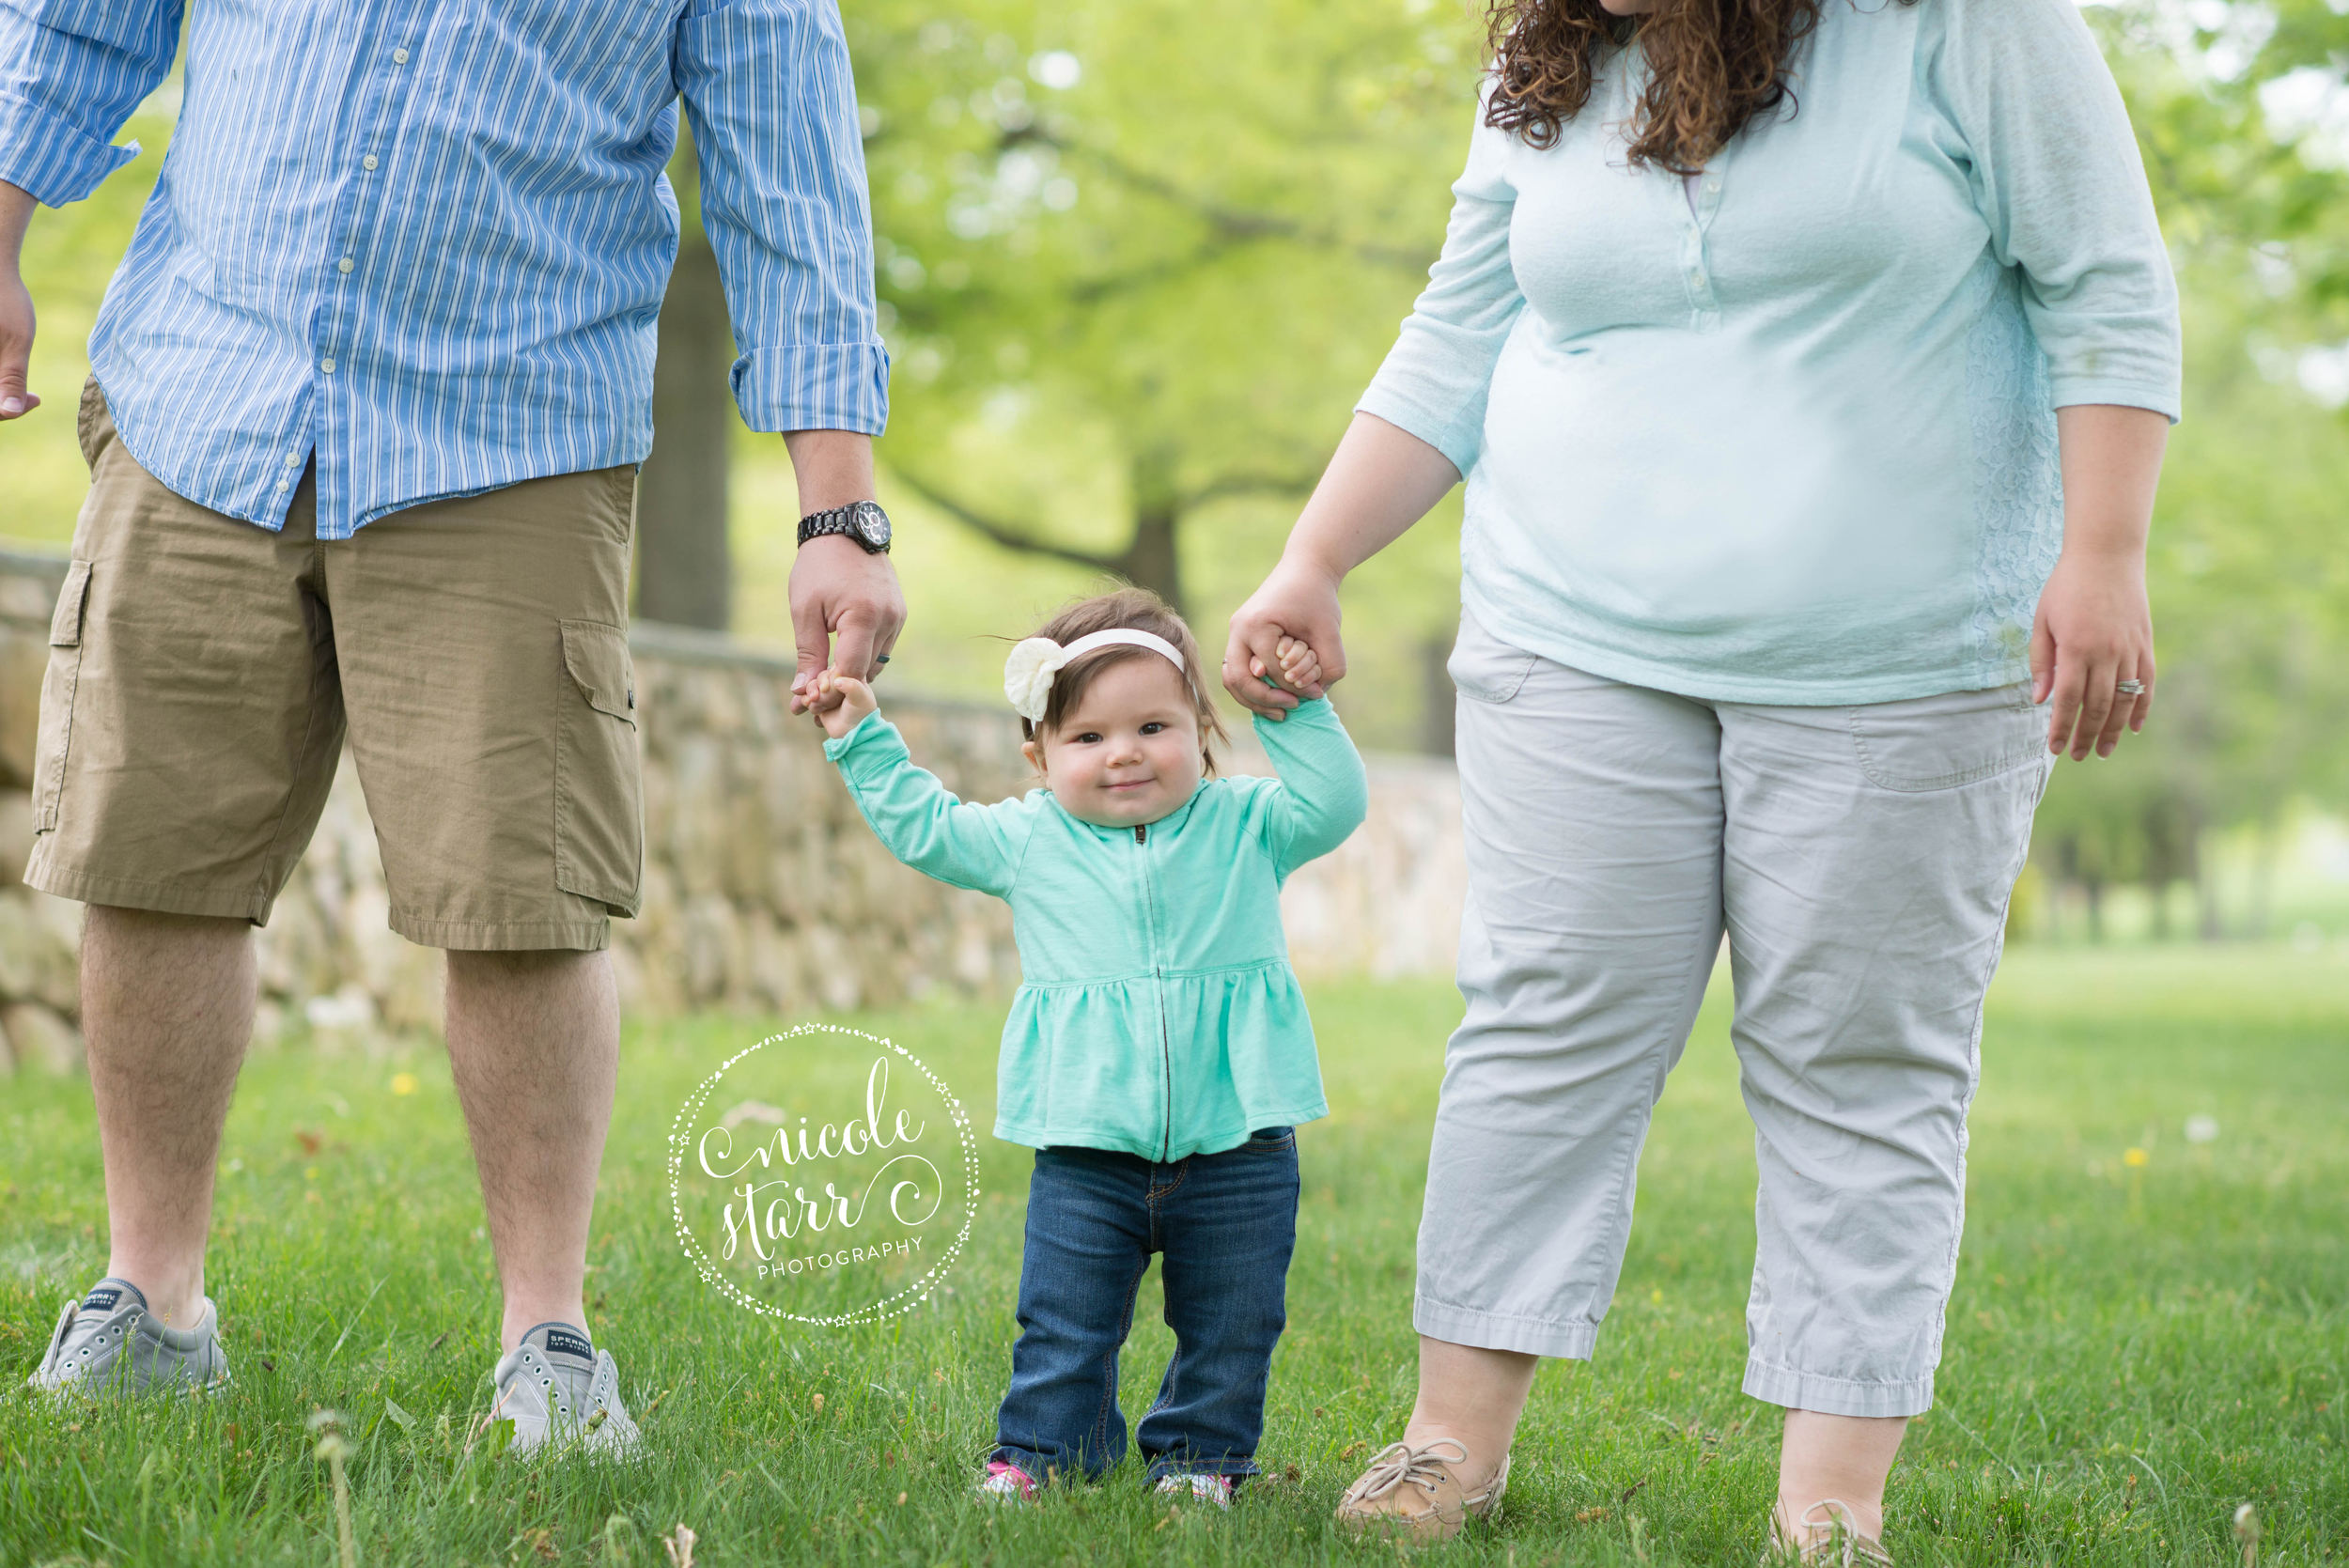 baby taking first steps in family photo with mom and dad